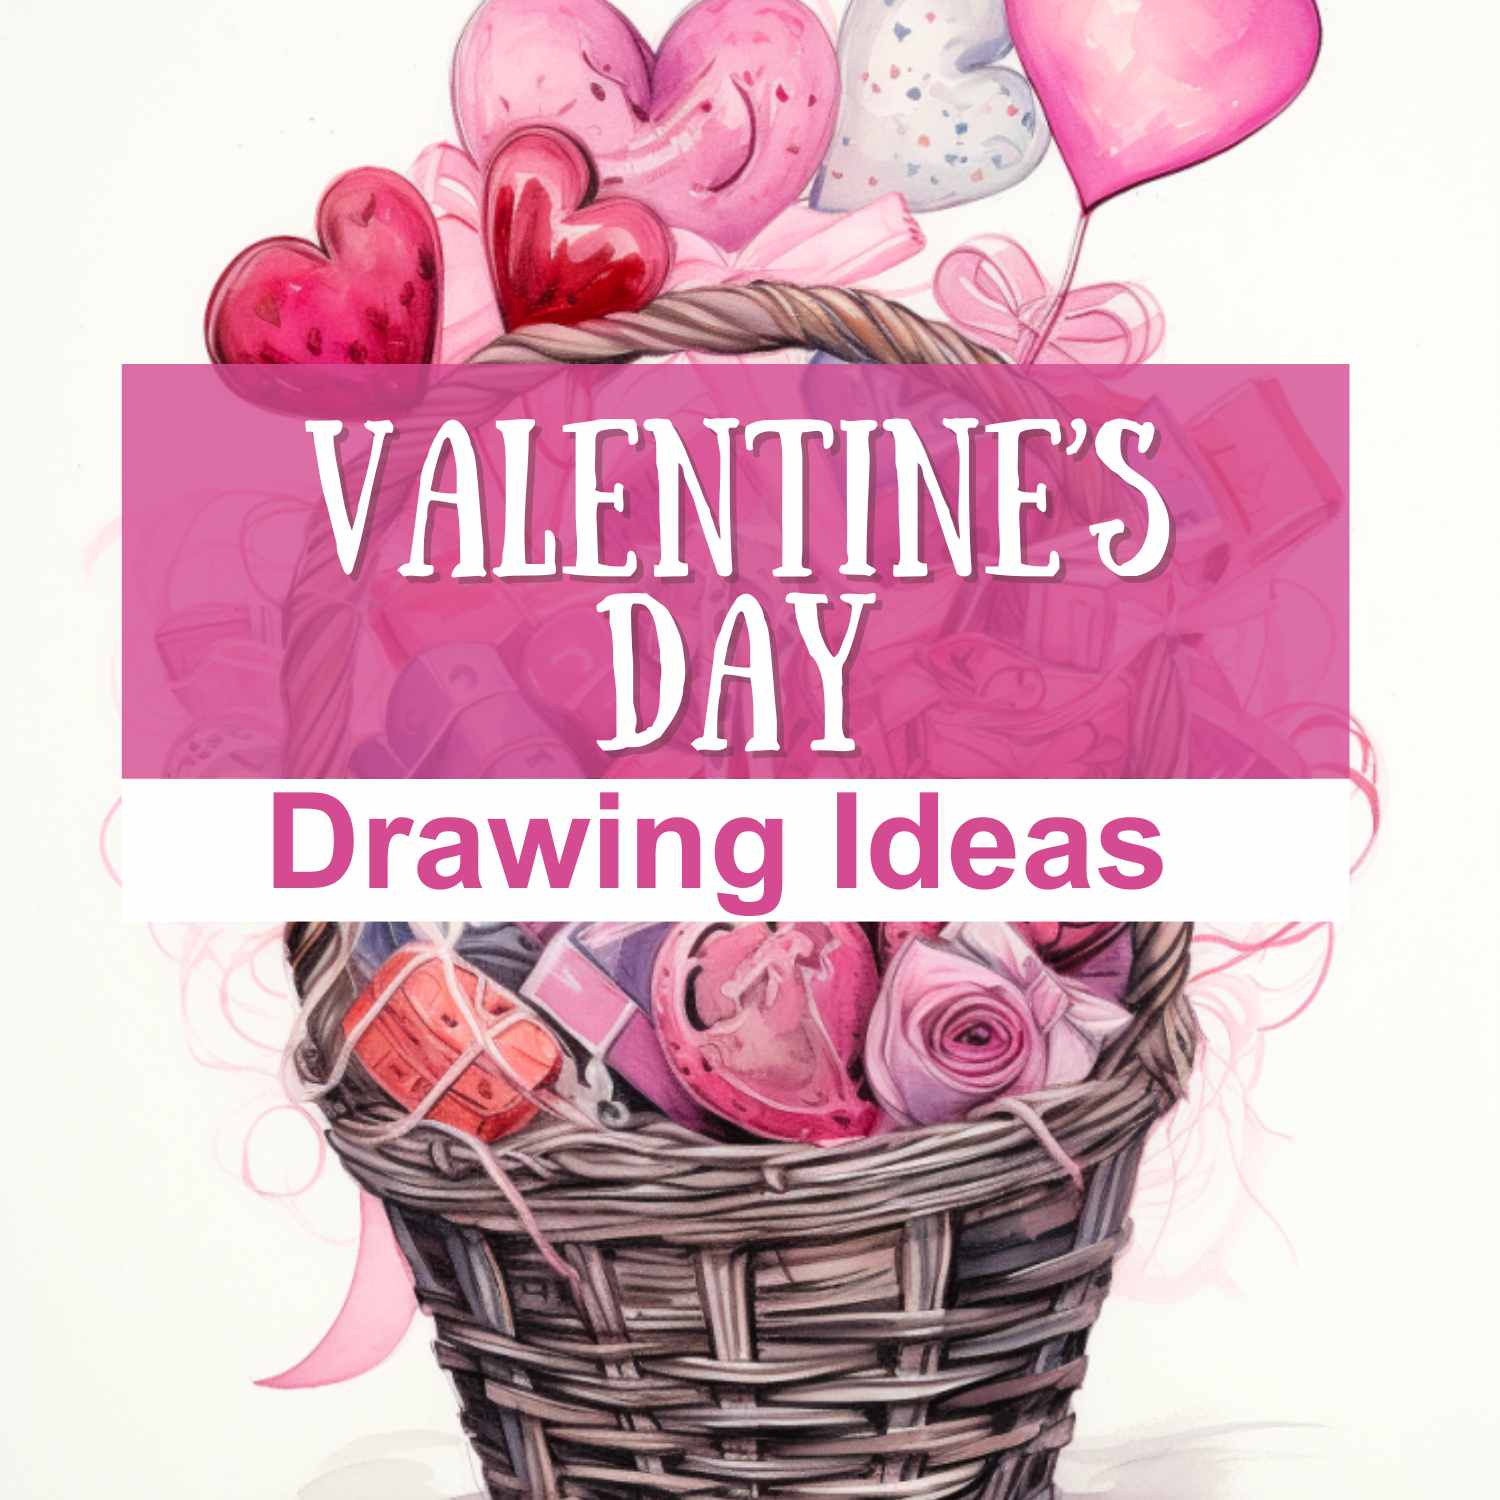 How to draw a gift drawing - VALENTINE'S DAY. Valentine's Day Card Drawing  Ideas - YouTube